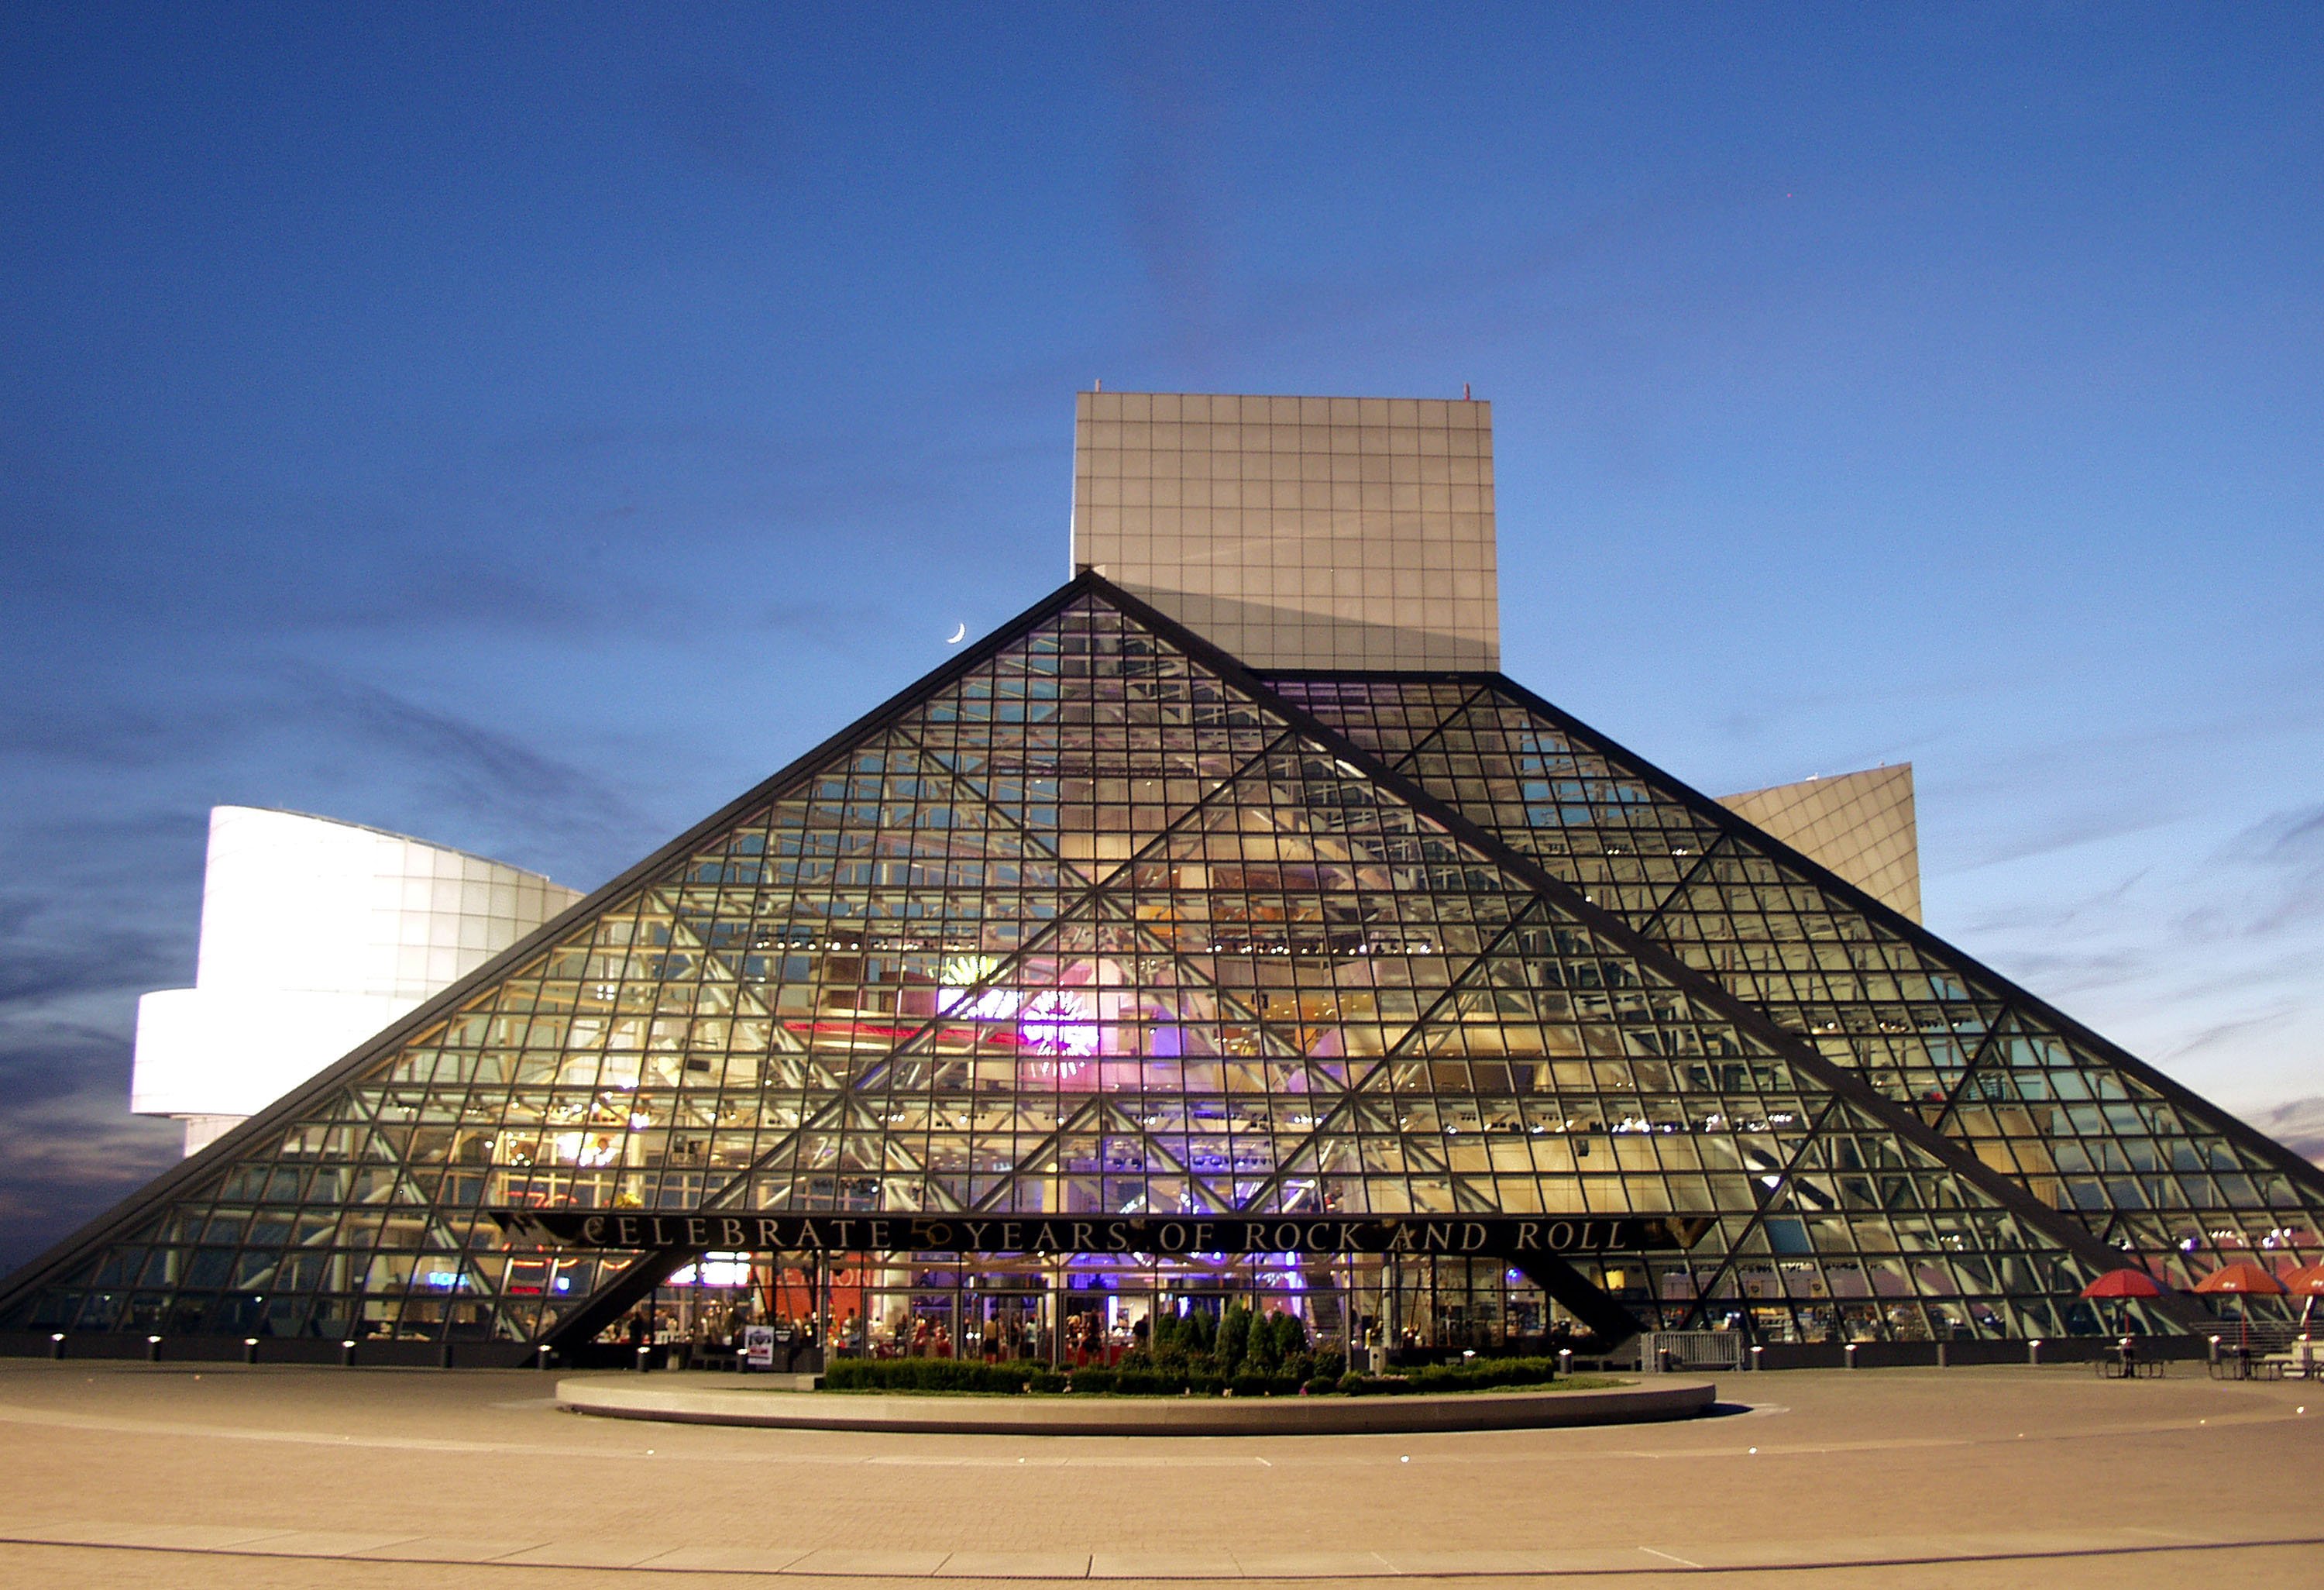 The glass exterior of the Rock and Roll Hall of Fame